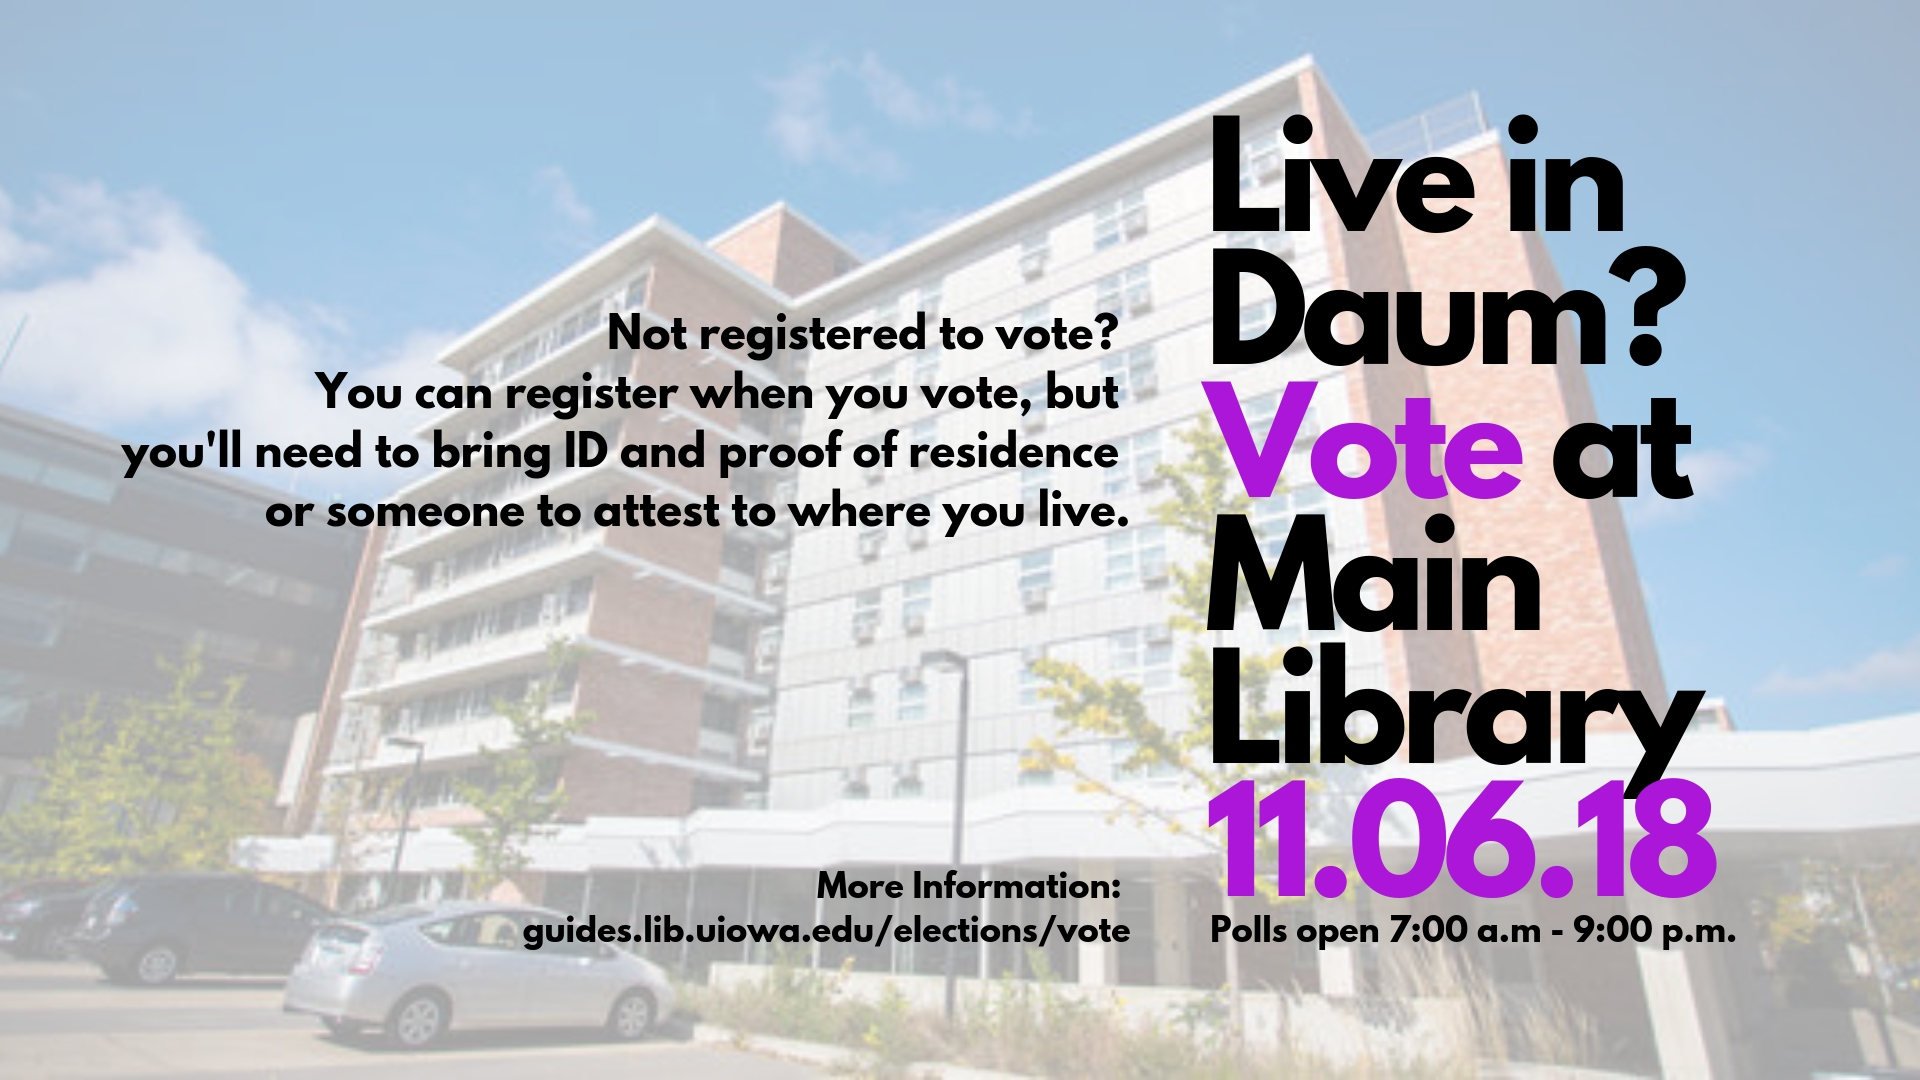 Daum Polling Place is Library